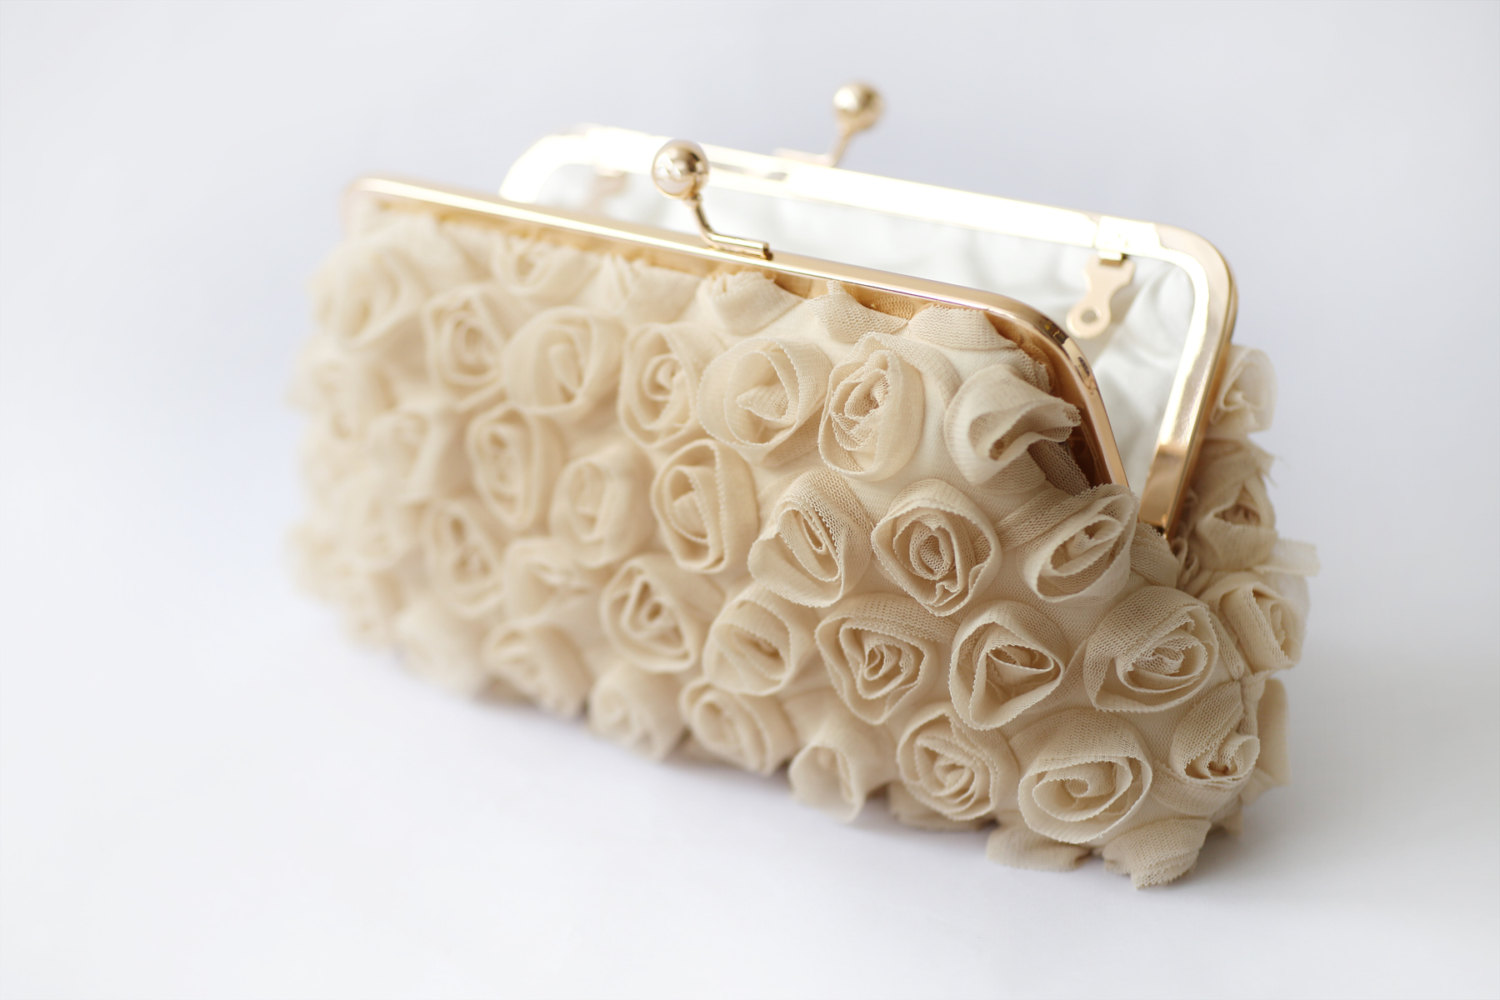 rosebuds floral wedding clutch | flower bags clutches weddings by ANGEE W.